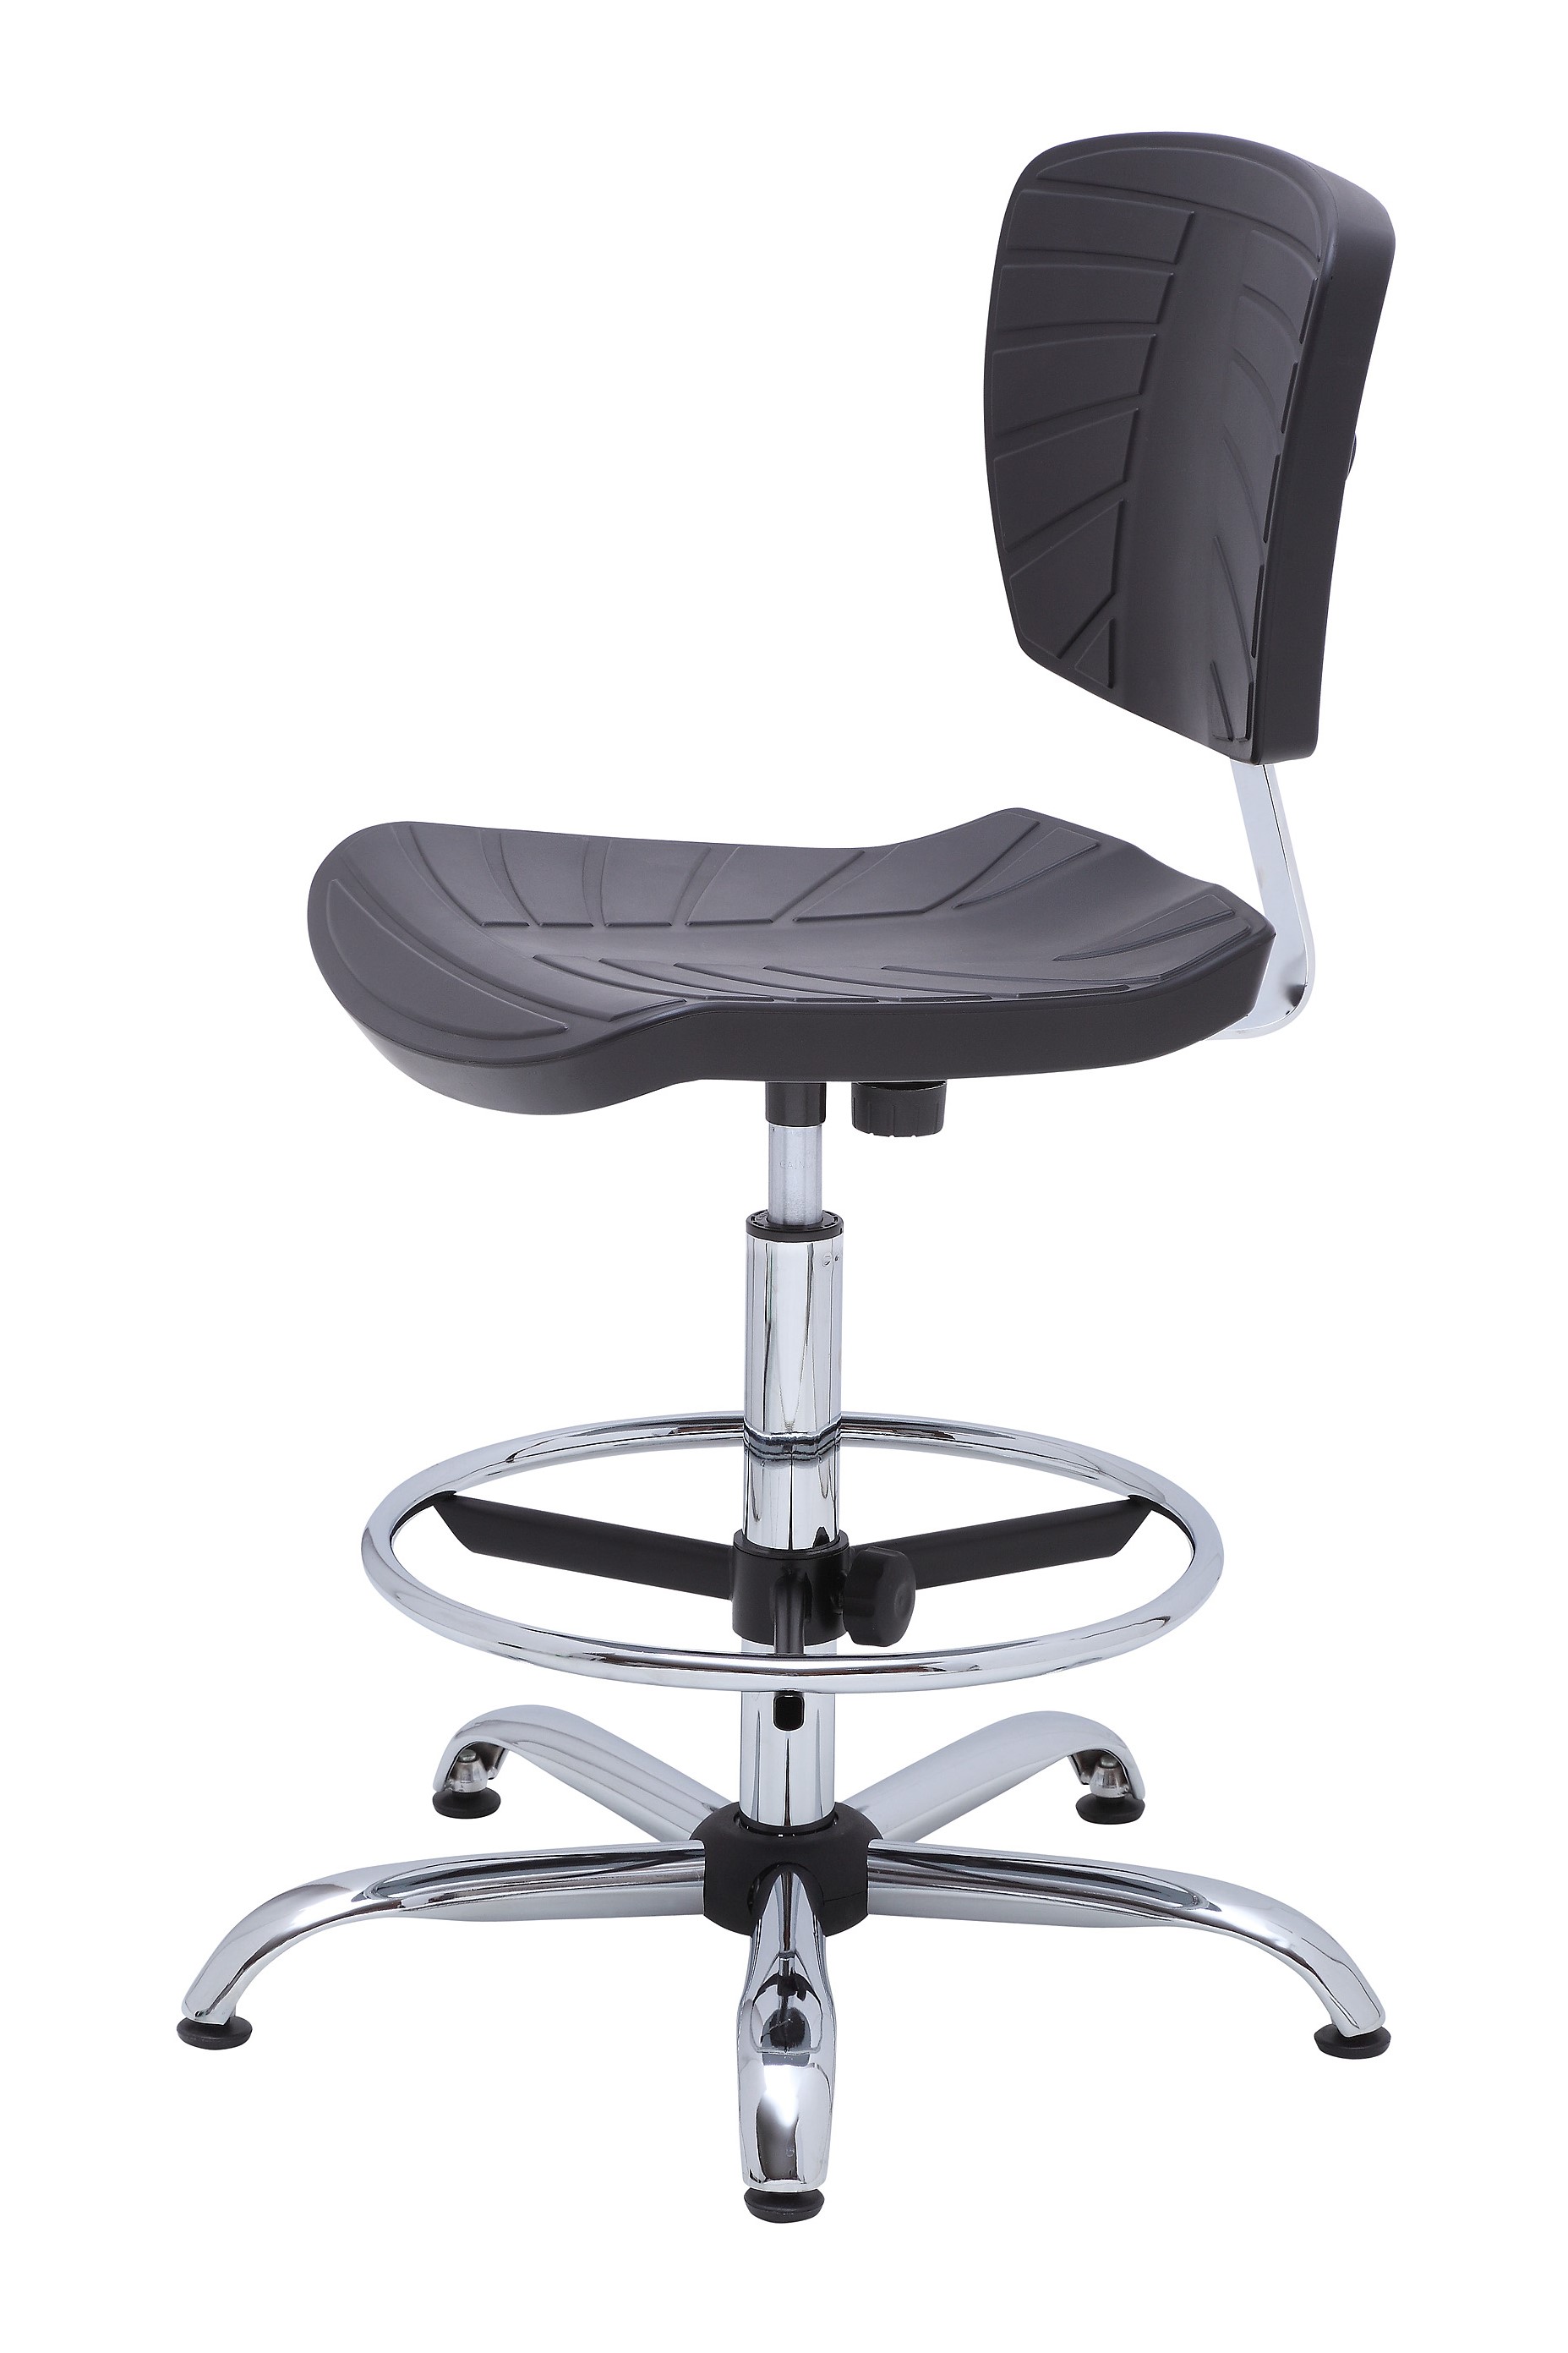 Plastpur ESD Swivel Chair with Glides ESD Chair GEMINI Special CHL Antistatic Chair ESD Products AES